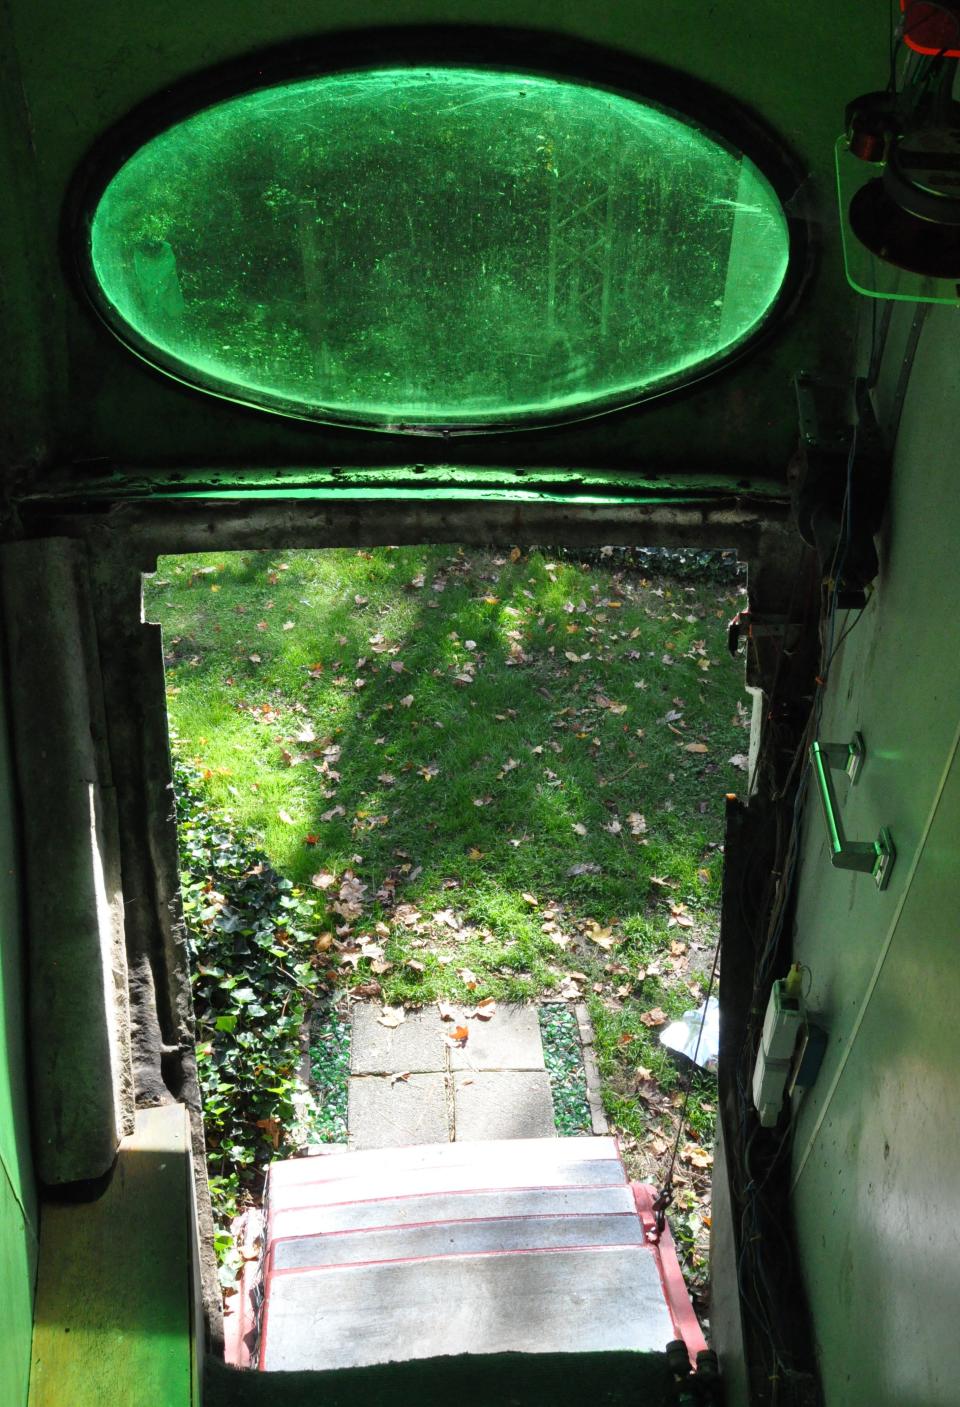 The retractable steps leading out of the Futuro house near Houston, Delaware.